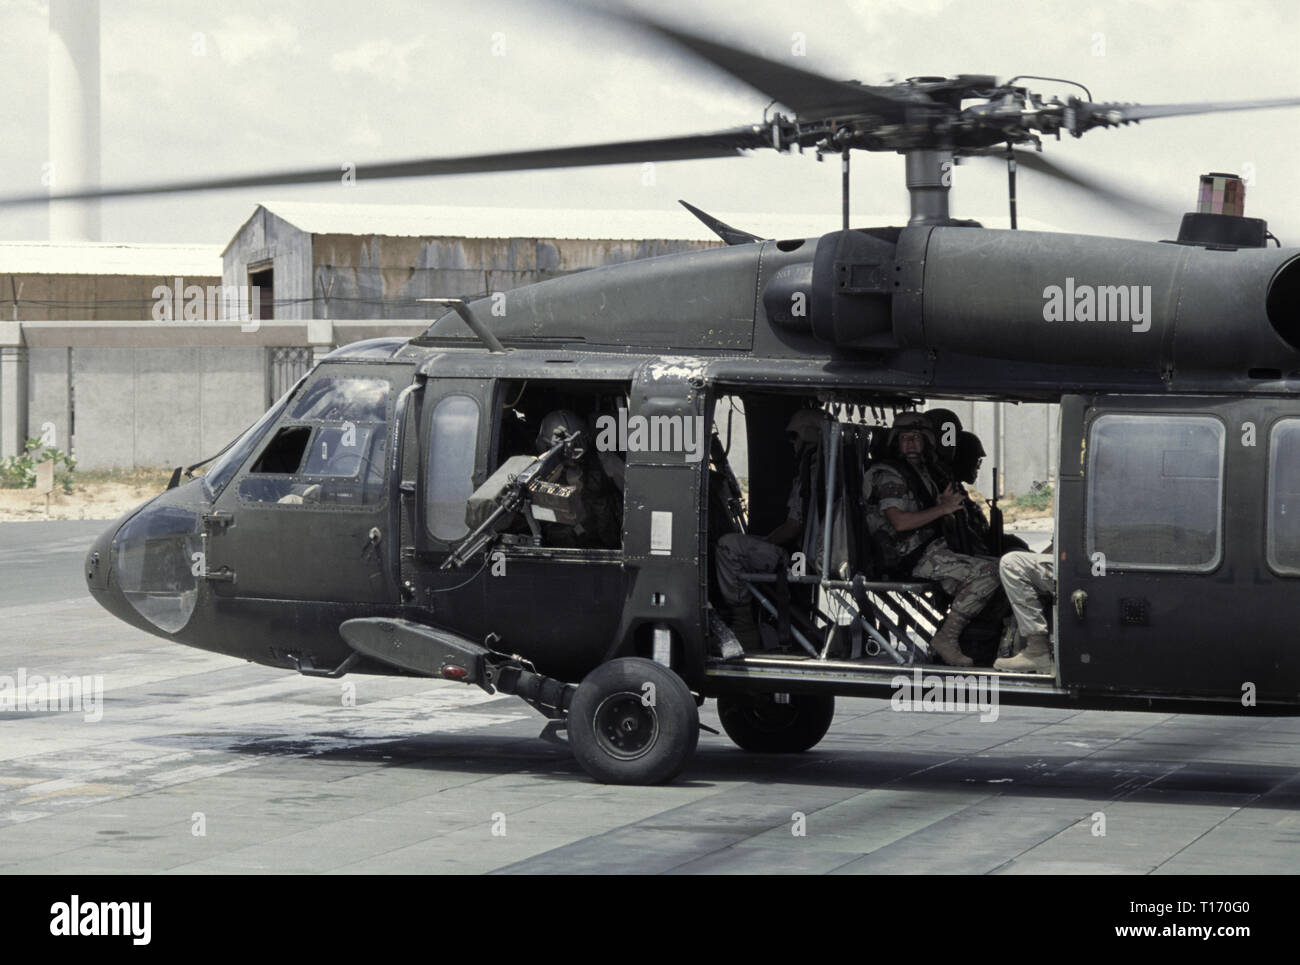 29th October 1993 U.S. Army soldiers on board a US Army Sikorsky UH-60 Black Hawk helicopter, ready fro take-off from the UNOSOM headquarters compound in Mogadishu, Somalia. Stock Photo